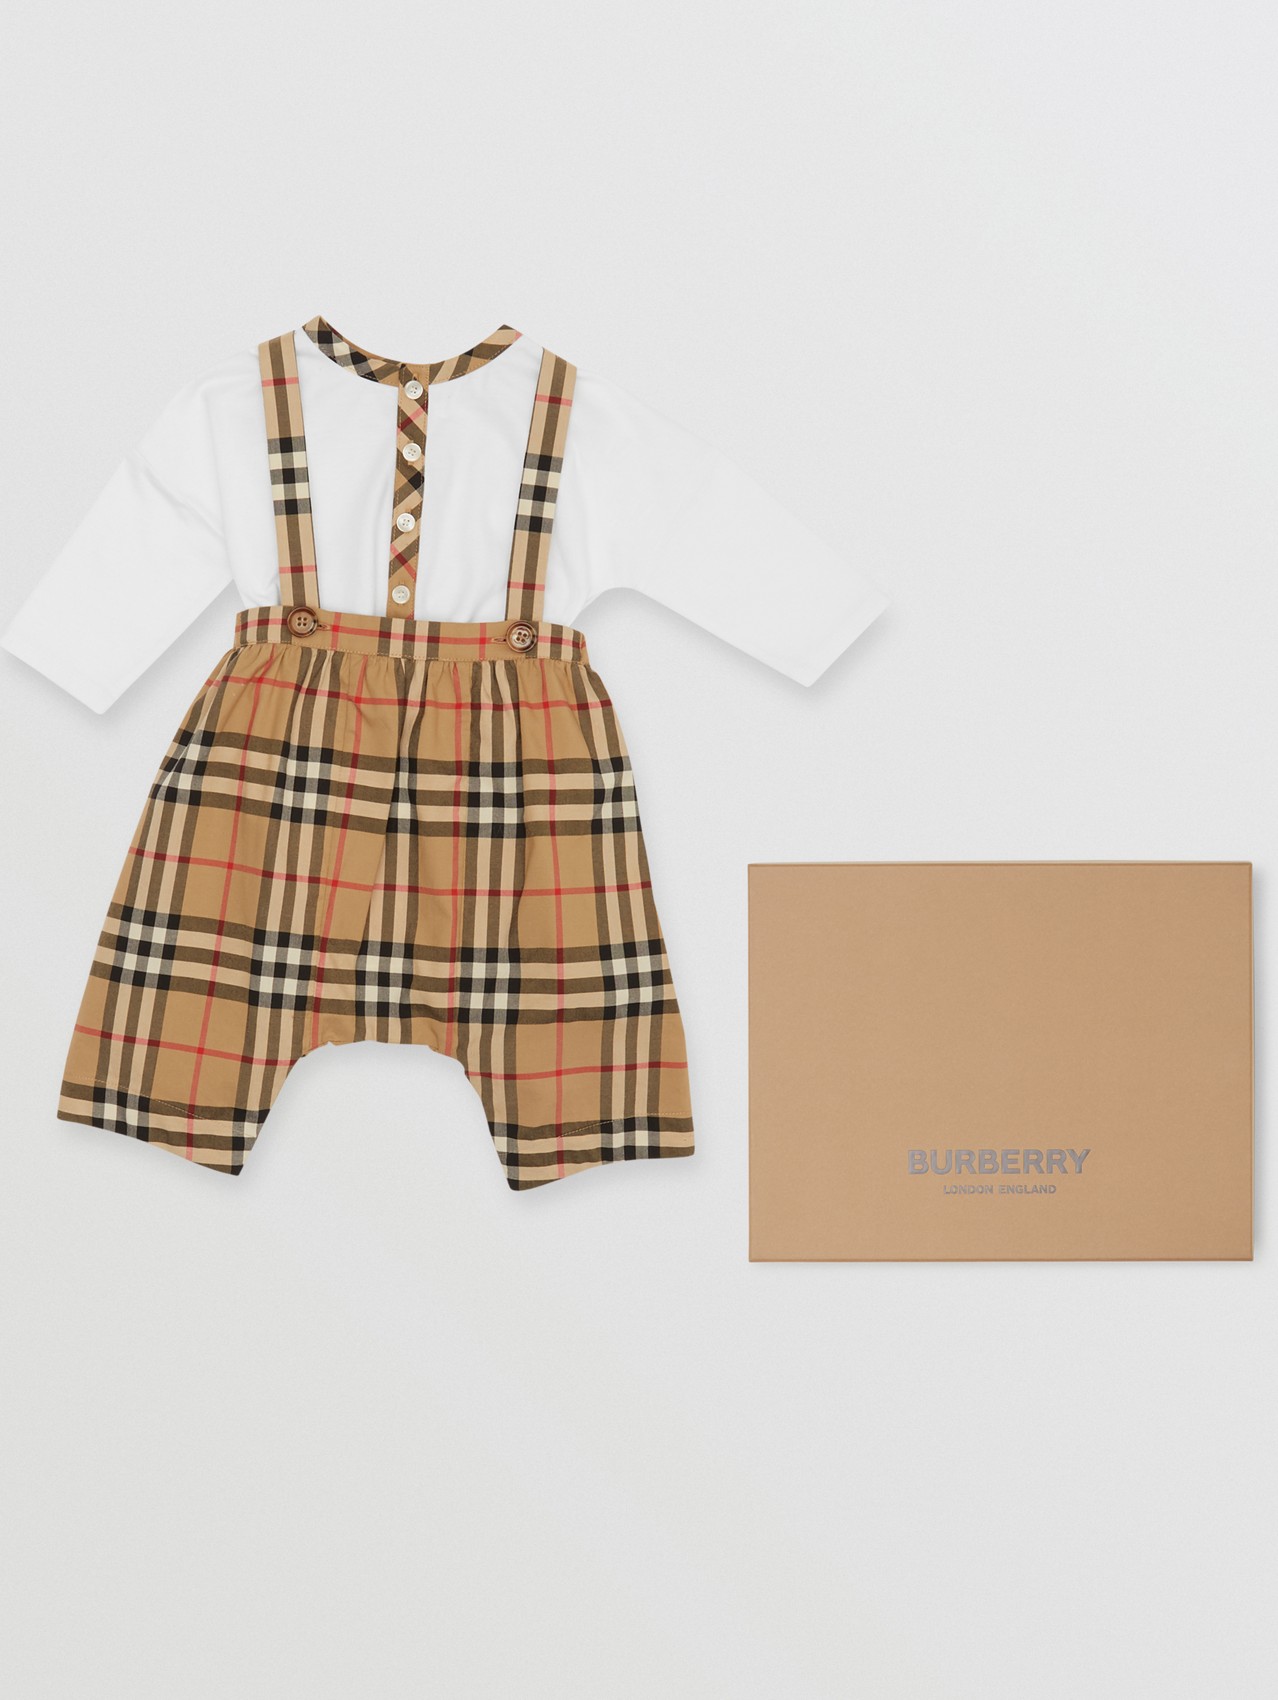 Gifts | Designer Gifts For Kids Burberry® Official